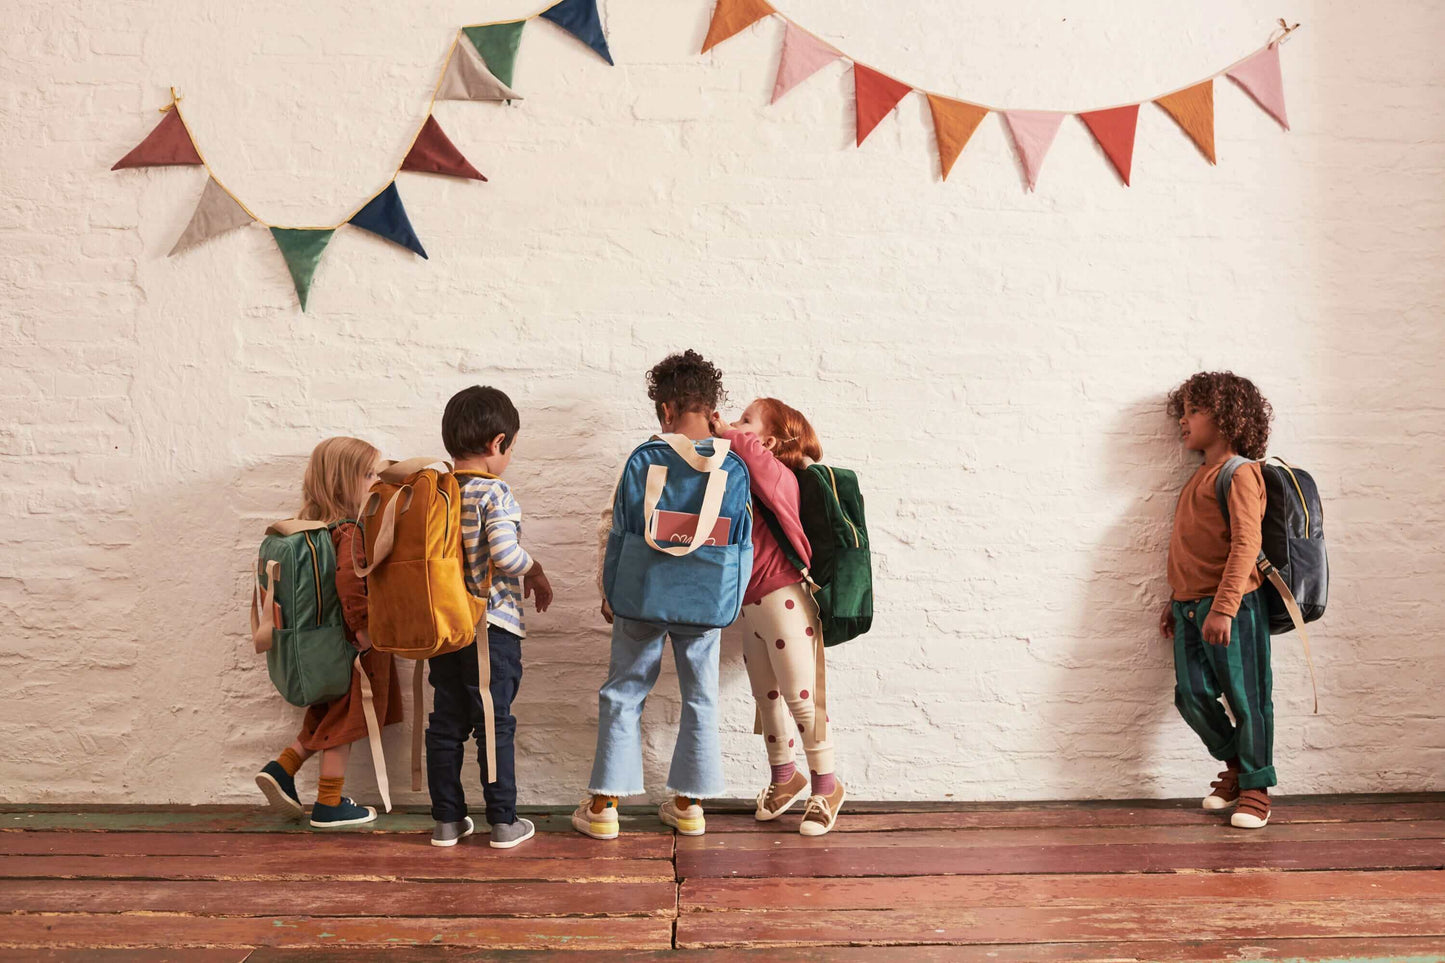 Children standing in school at recess with colorful velour backpacks from Bettys Home. Above the children hangs a wall decoration in the form of a garland of triangles from Bettys Home 